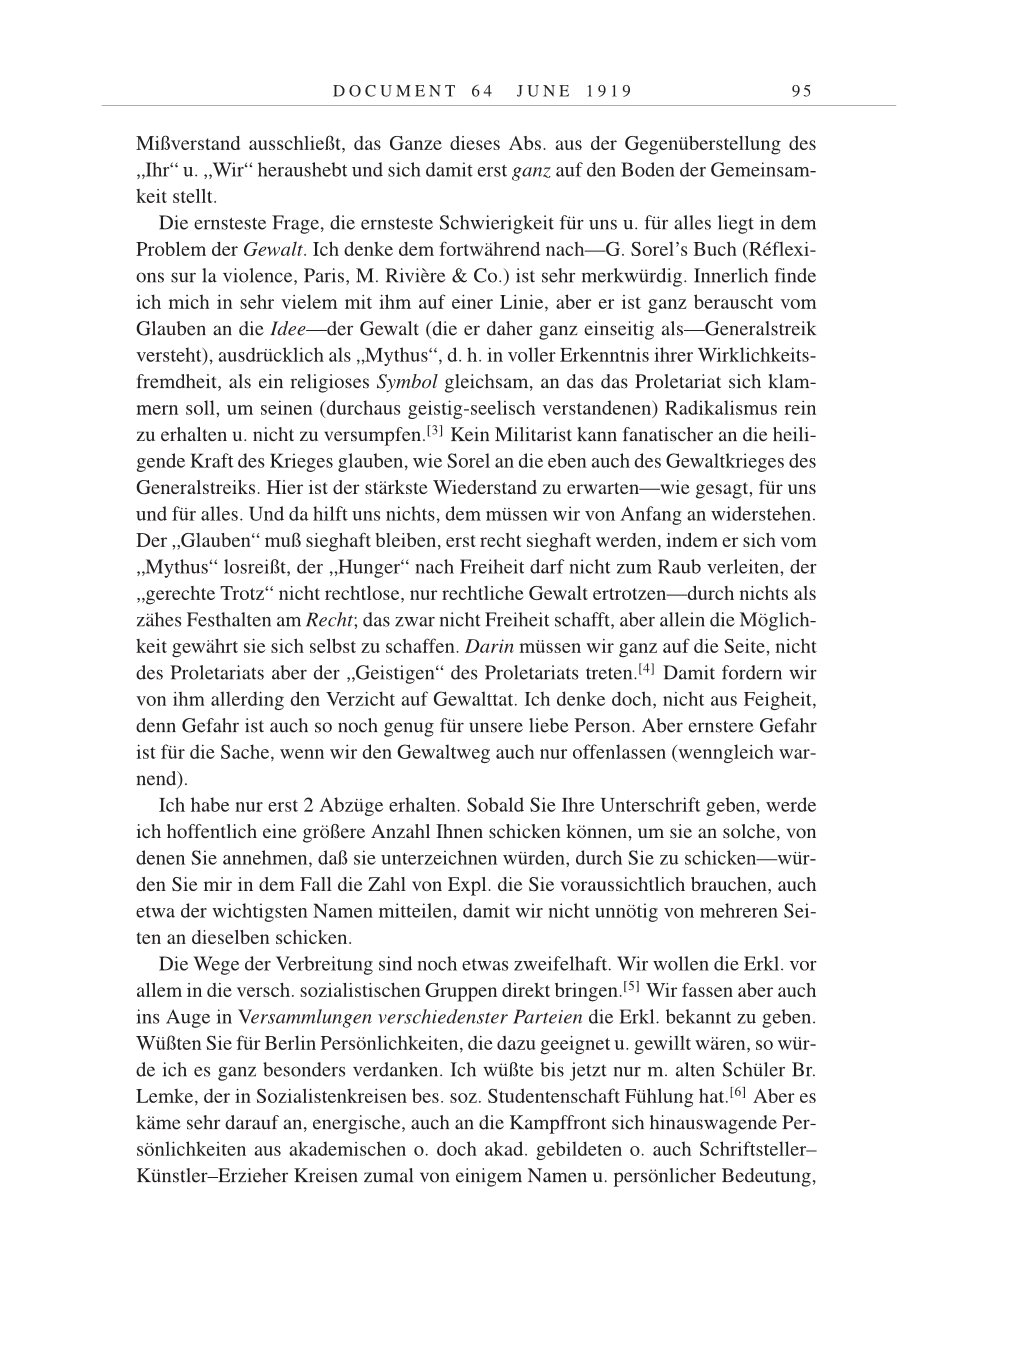 Volume 9: The Berlin Years: Correspondence January 1919-April 1920 page 95